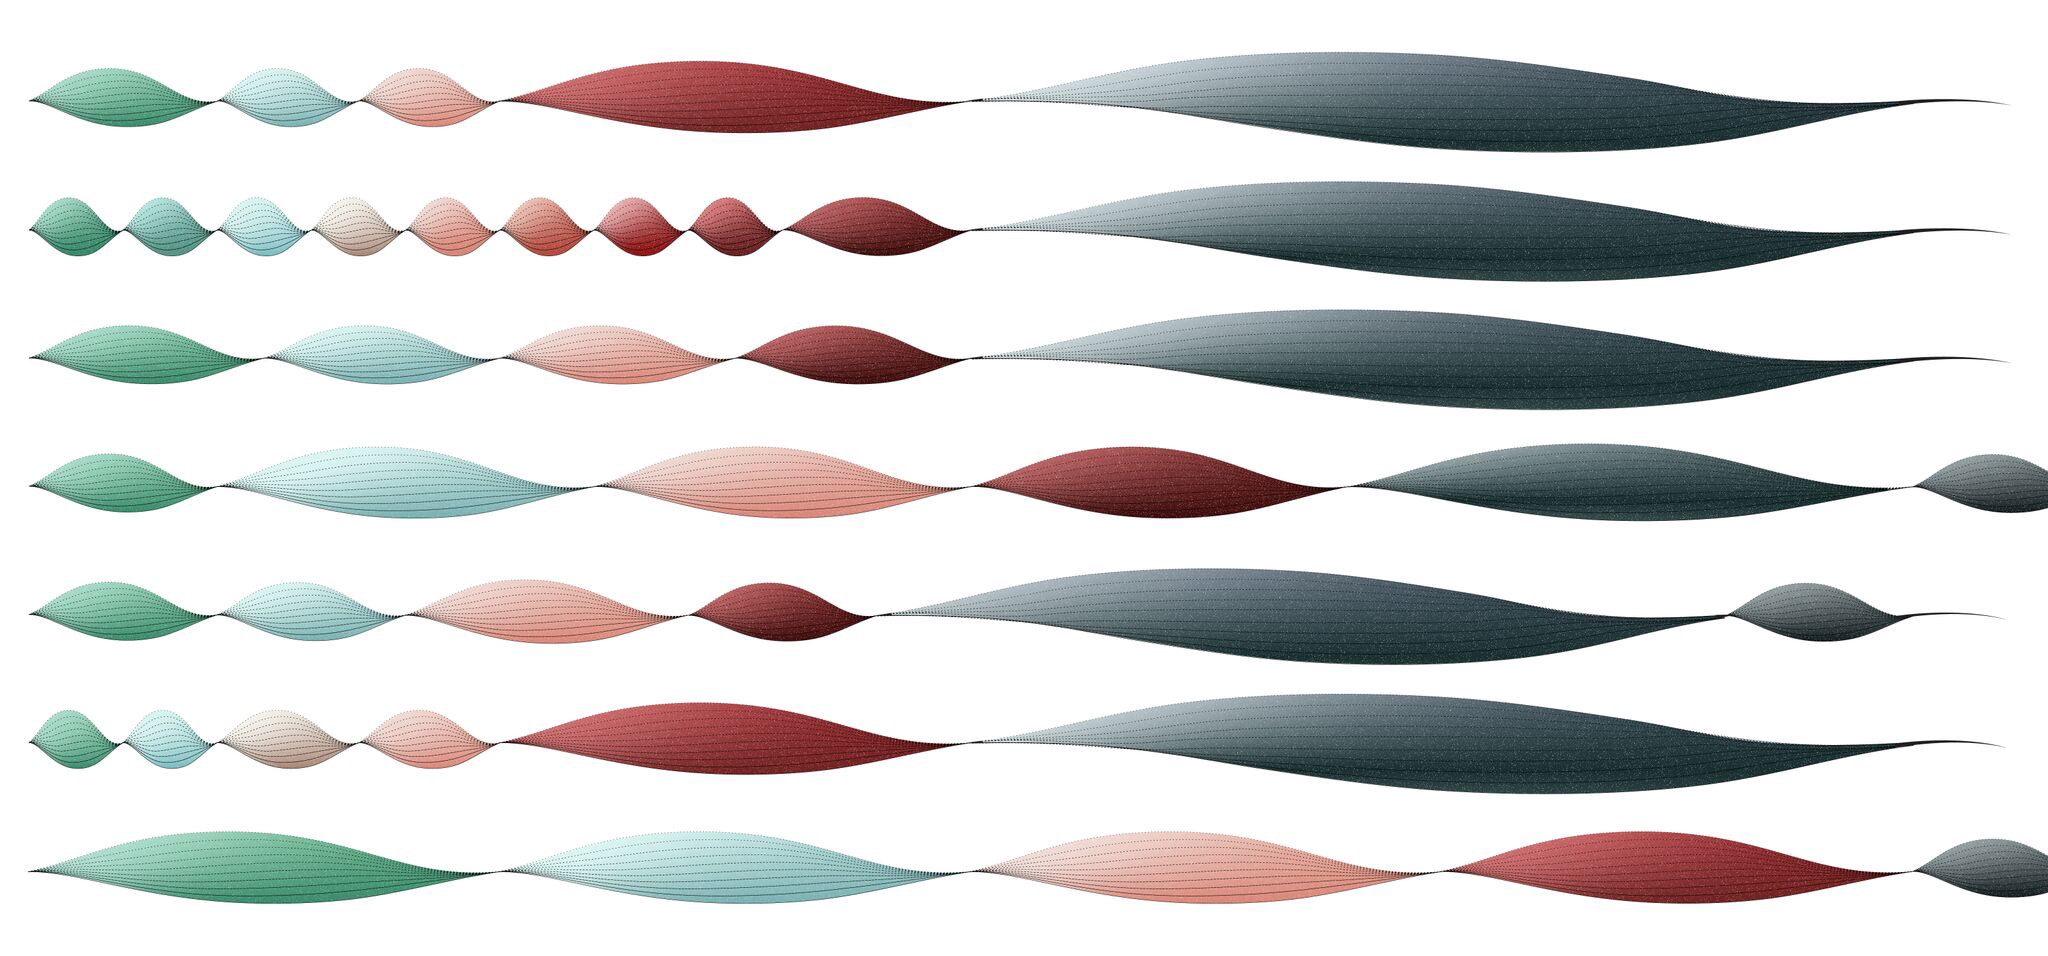 An abstract illustration–horizontal red and green lines.